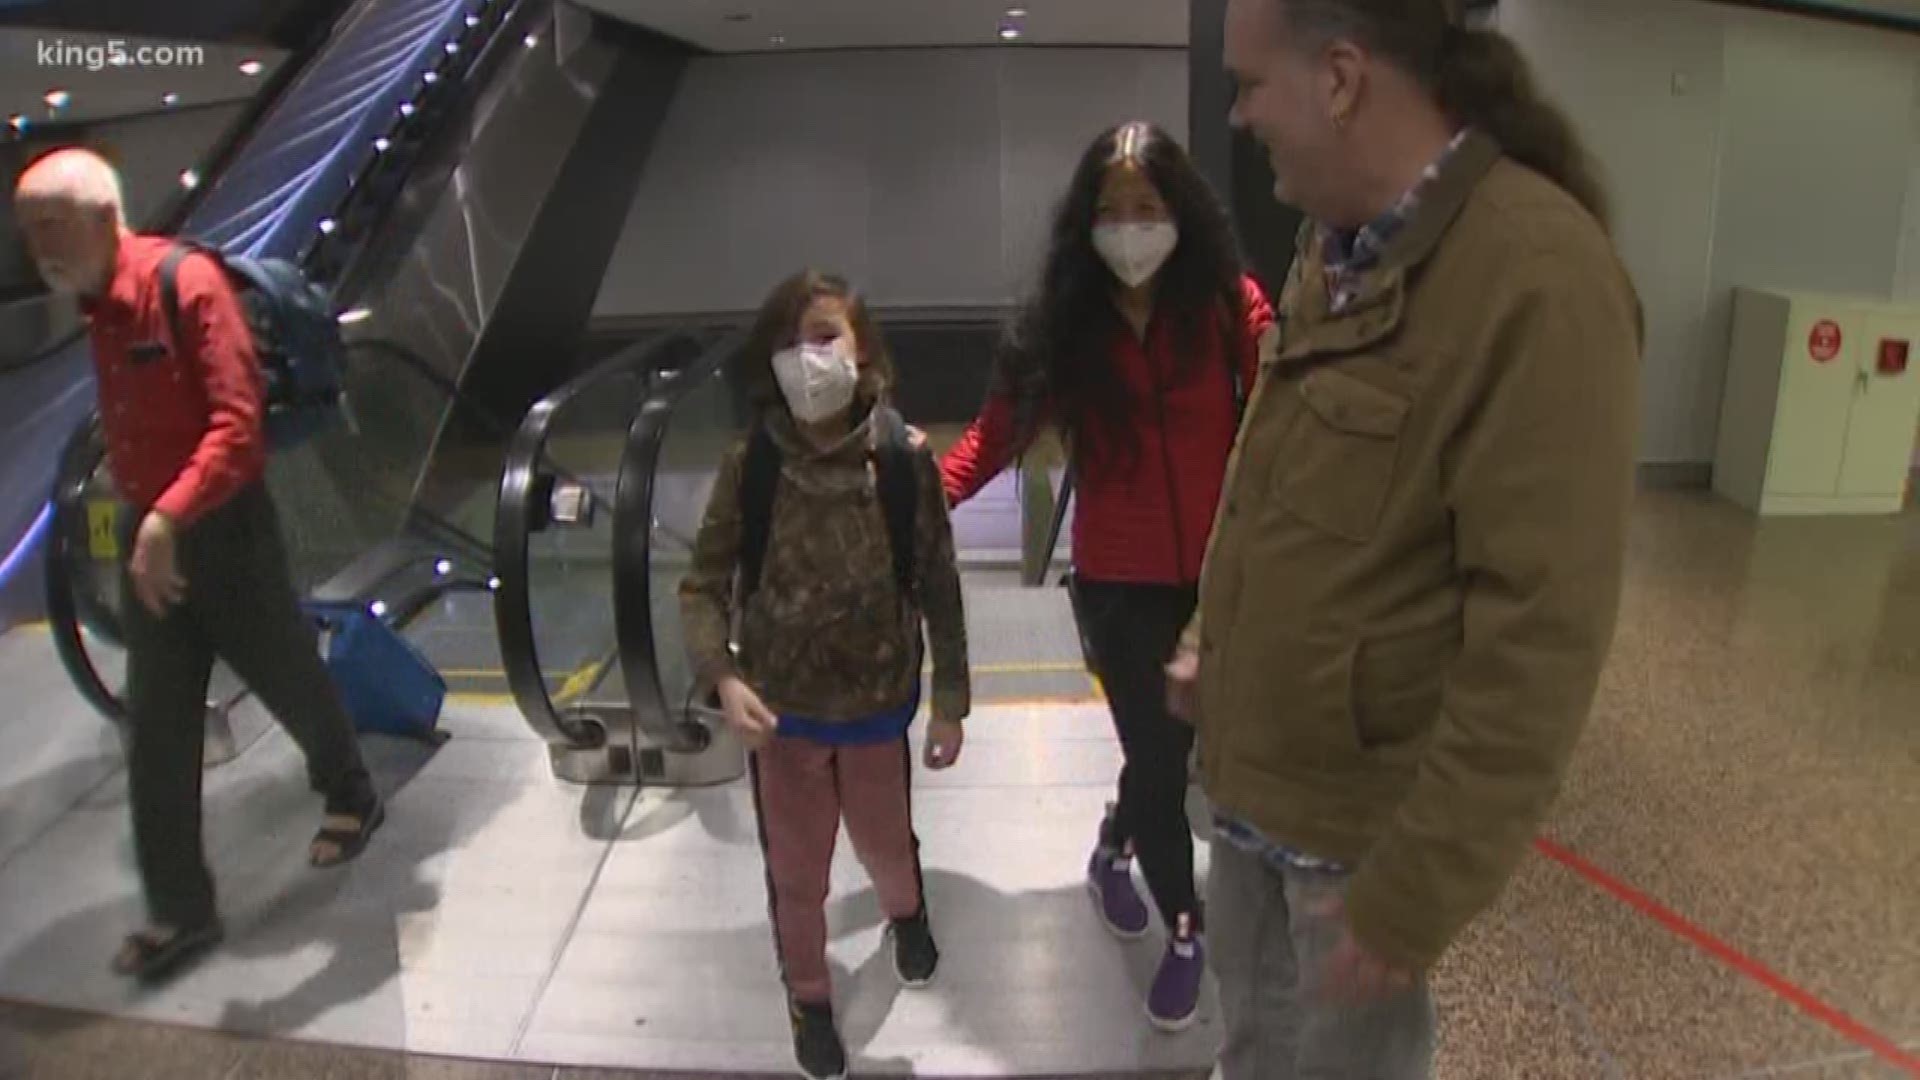 A 9-year-old Bellevue boy was reunited with his father in Seattle after spending two weeks in China amid the Wuhan coronavirus outbreak.